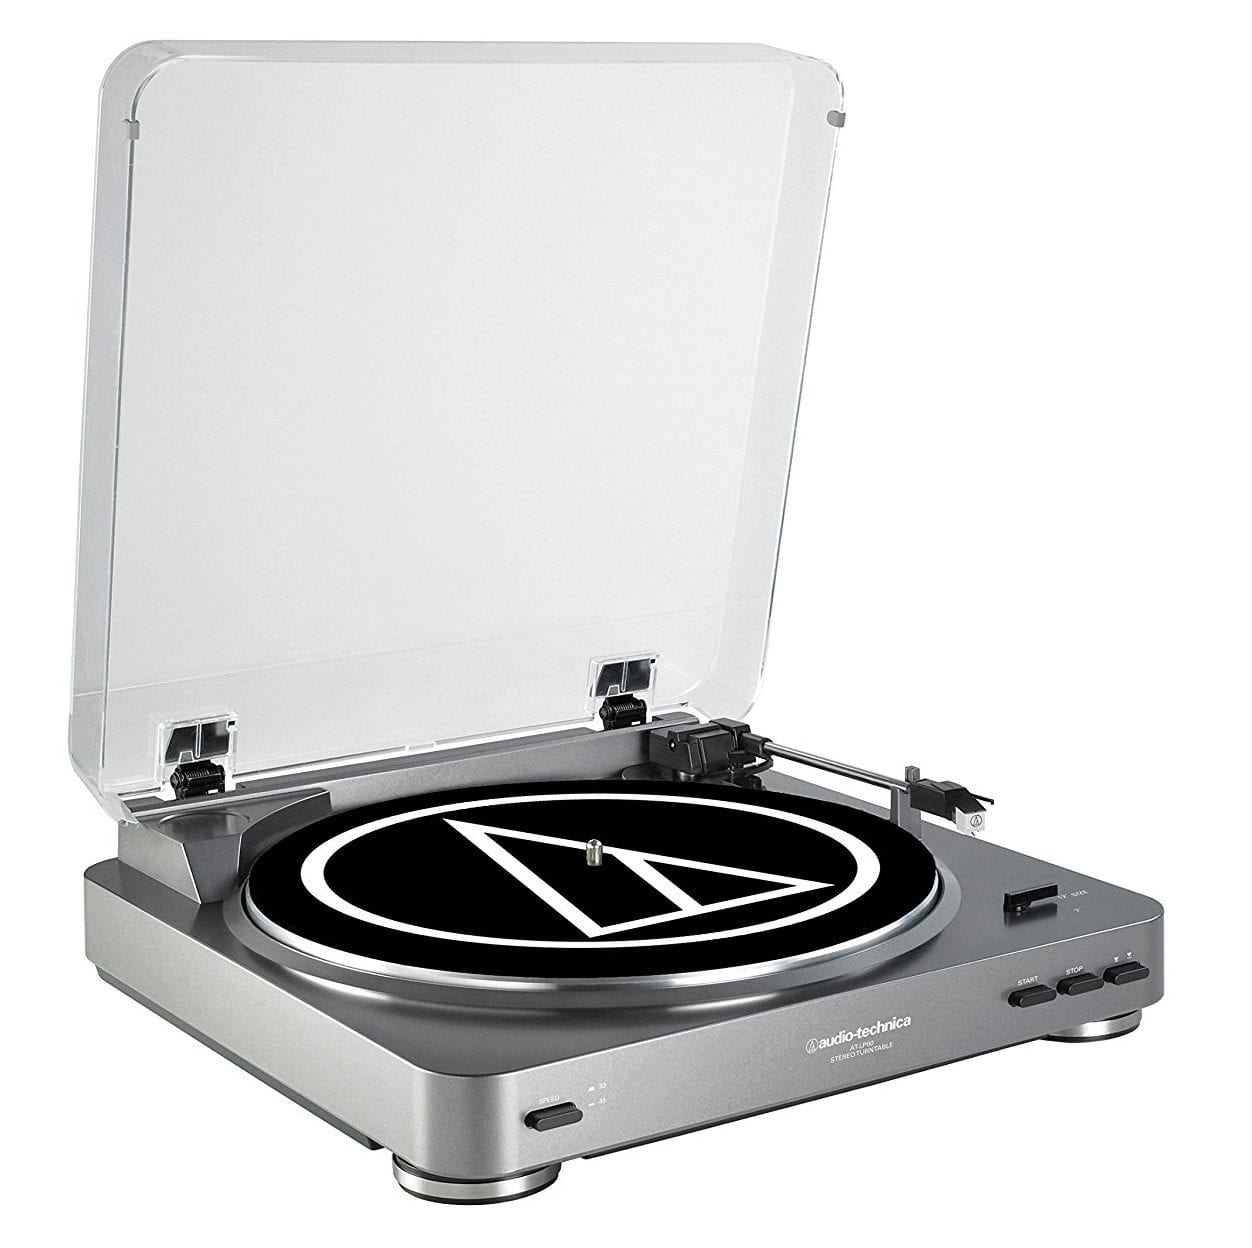 Best Turntable & Record Player 2017: Audio Technica